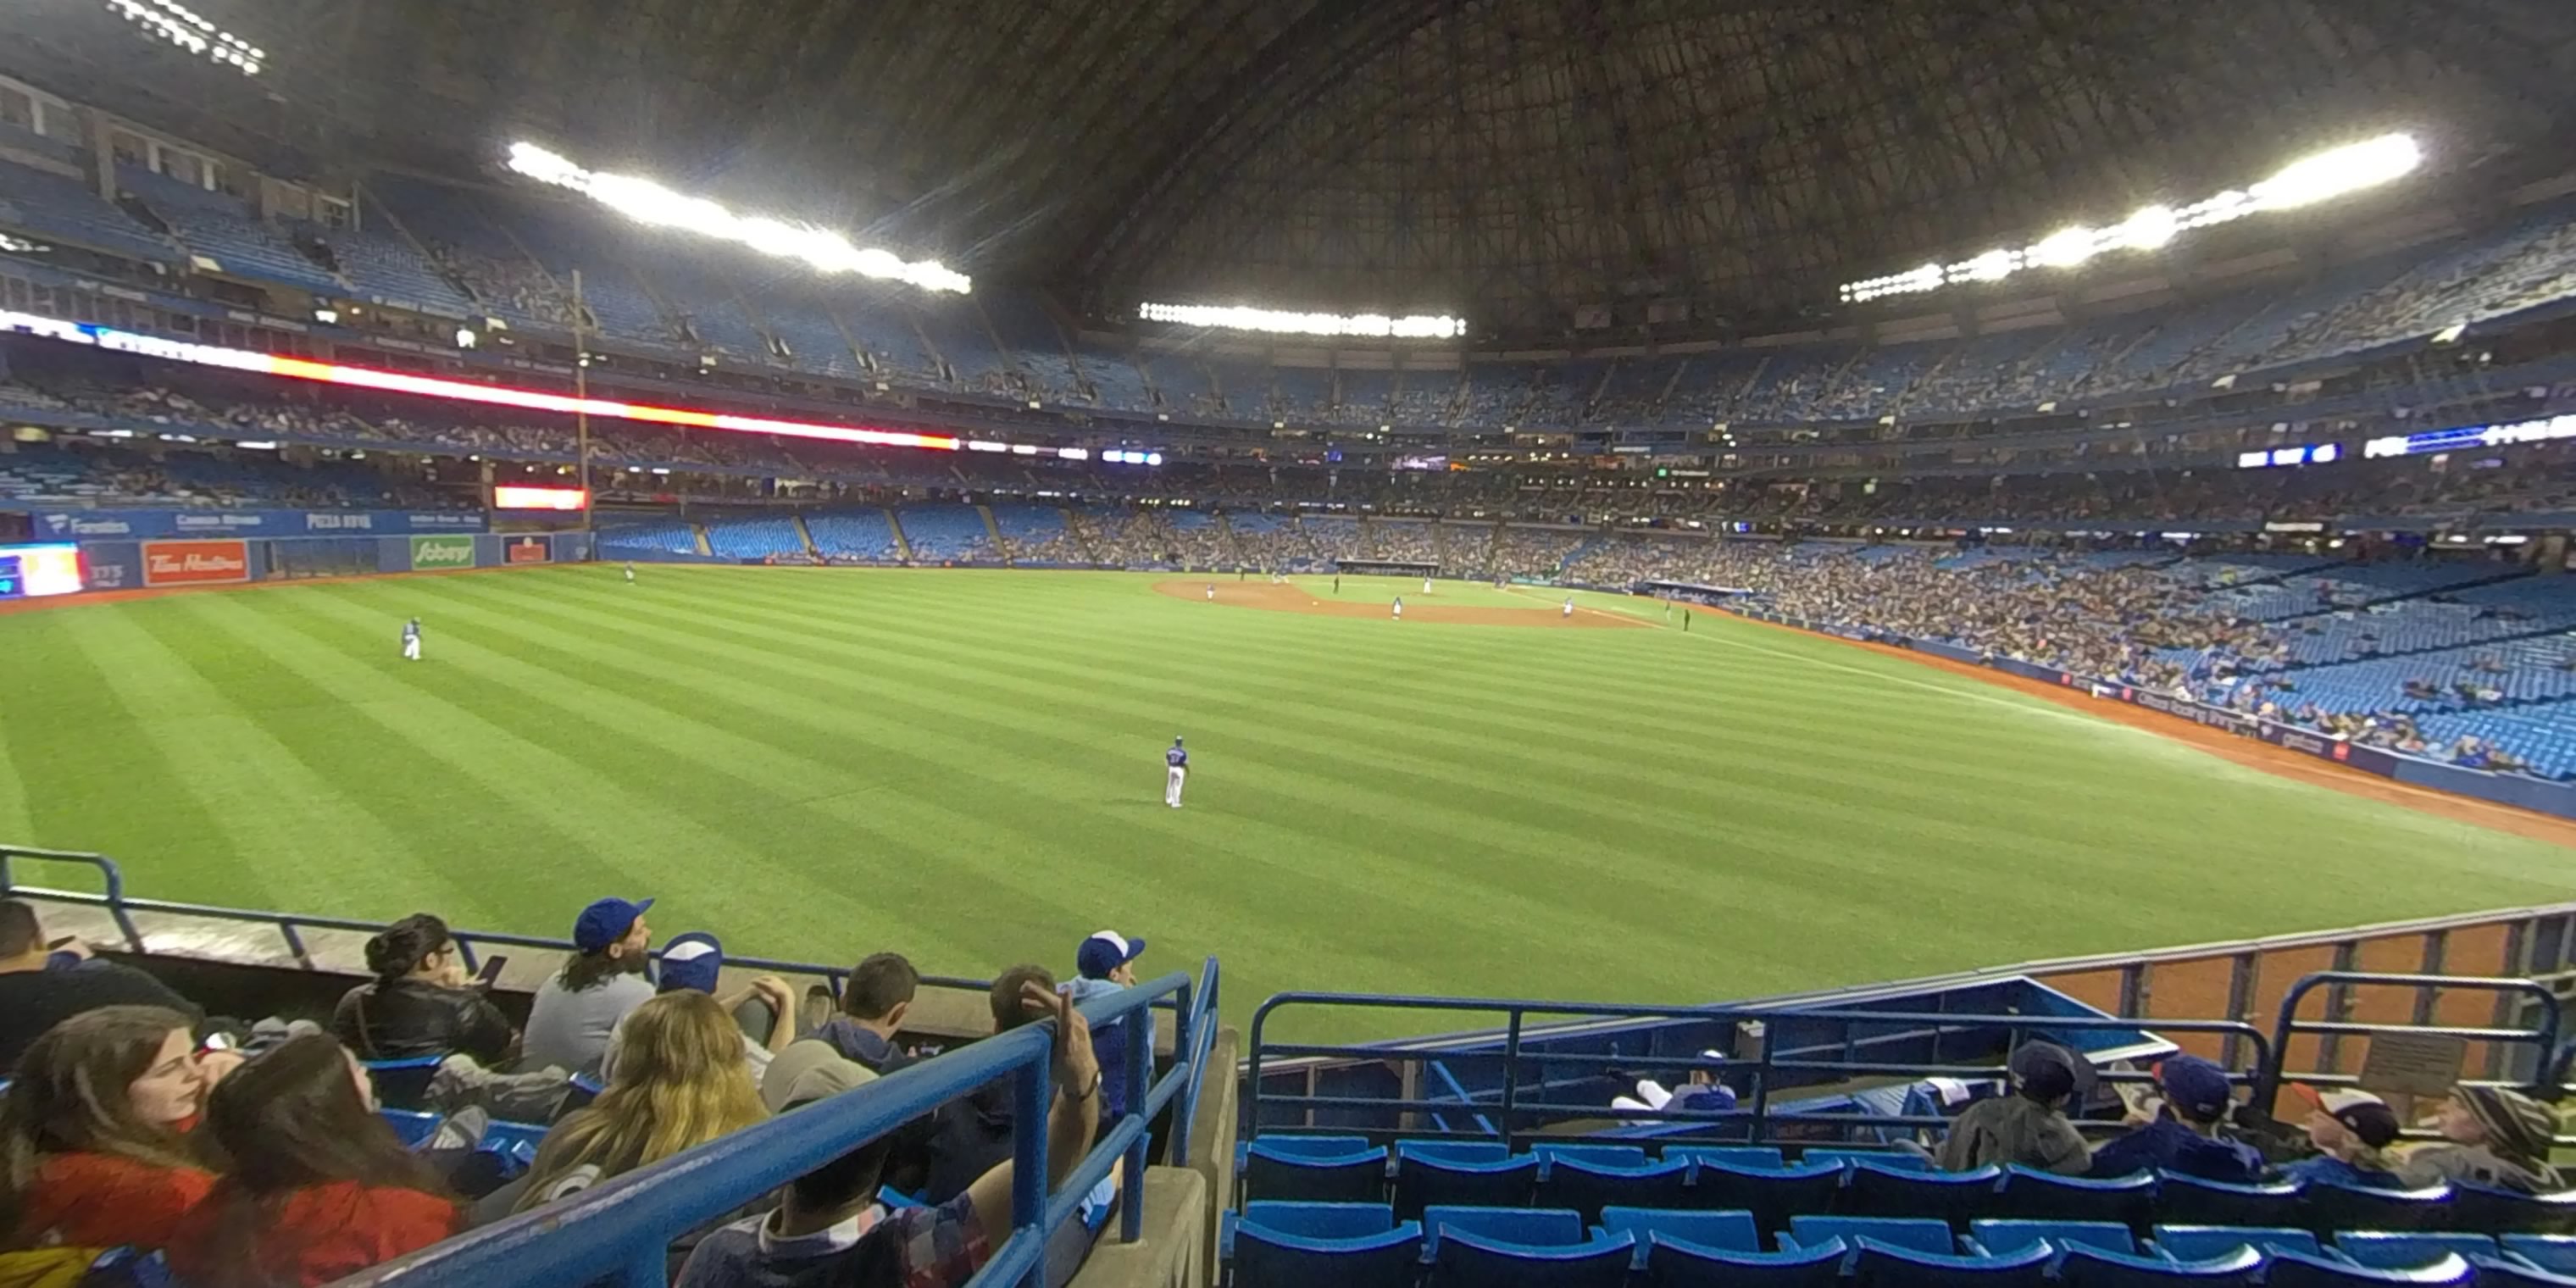 Toronto Blue Jays Interactive Seating Chart with Seat Views